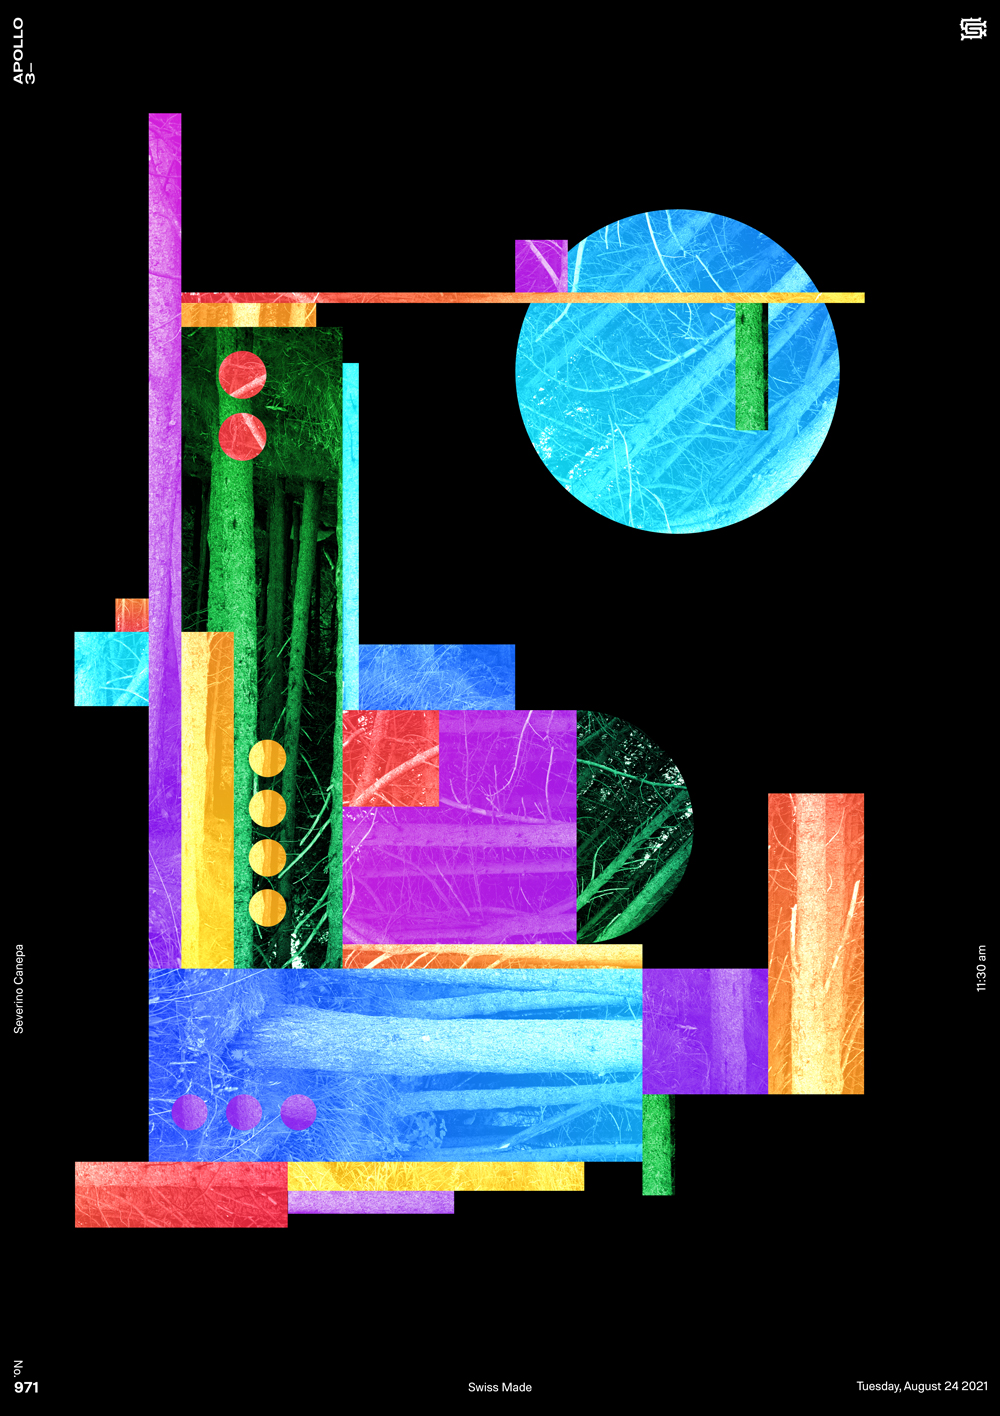 Geometric poster realized with many colors and geometric shapes I took from a photograph